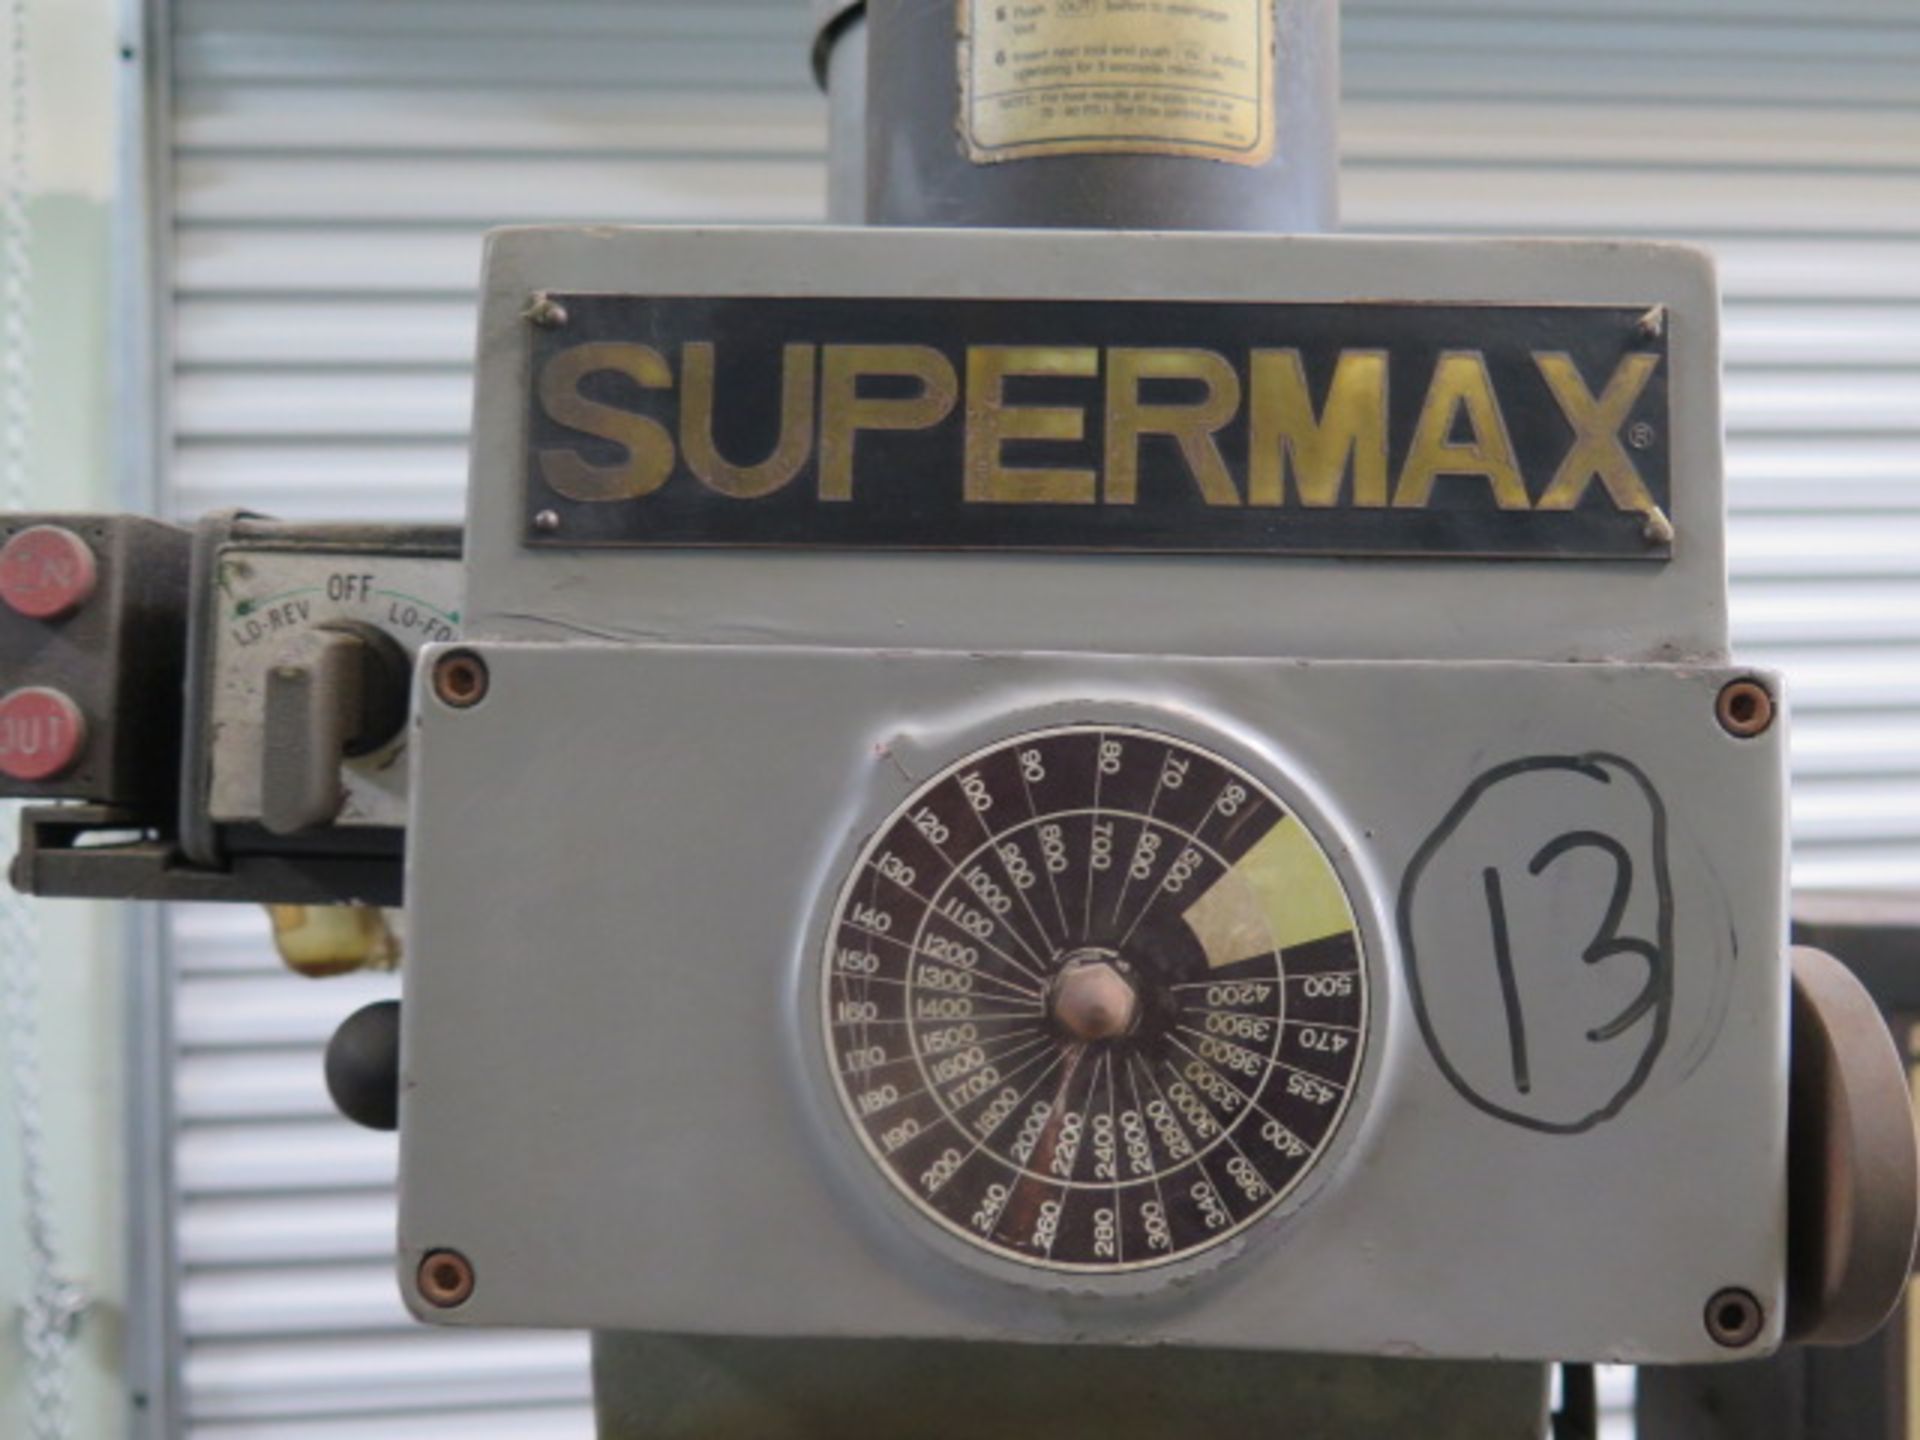 Supermax 3-Axis CNC Vertical Mill w/ Anilam Crusader II Controls, 60-4200 Dial Change RPM, Power - Image 10 of 10